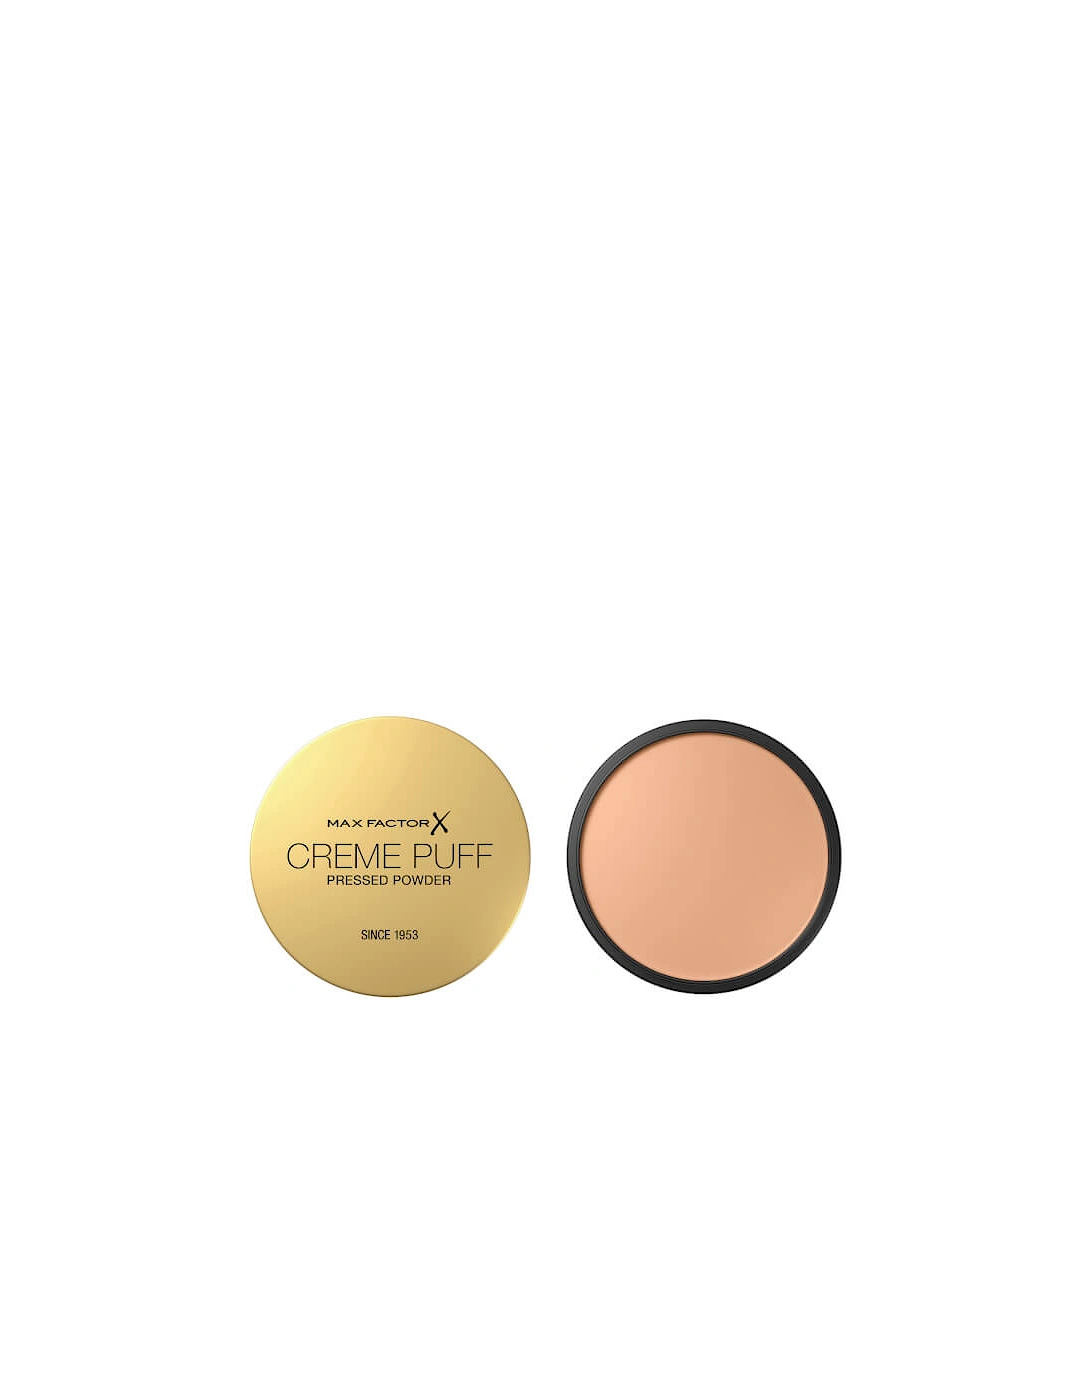 Creme Puff Pressed Powder - Truly Fairly, 2 of 1